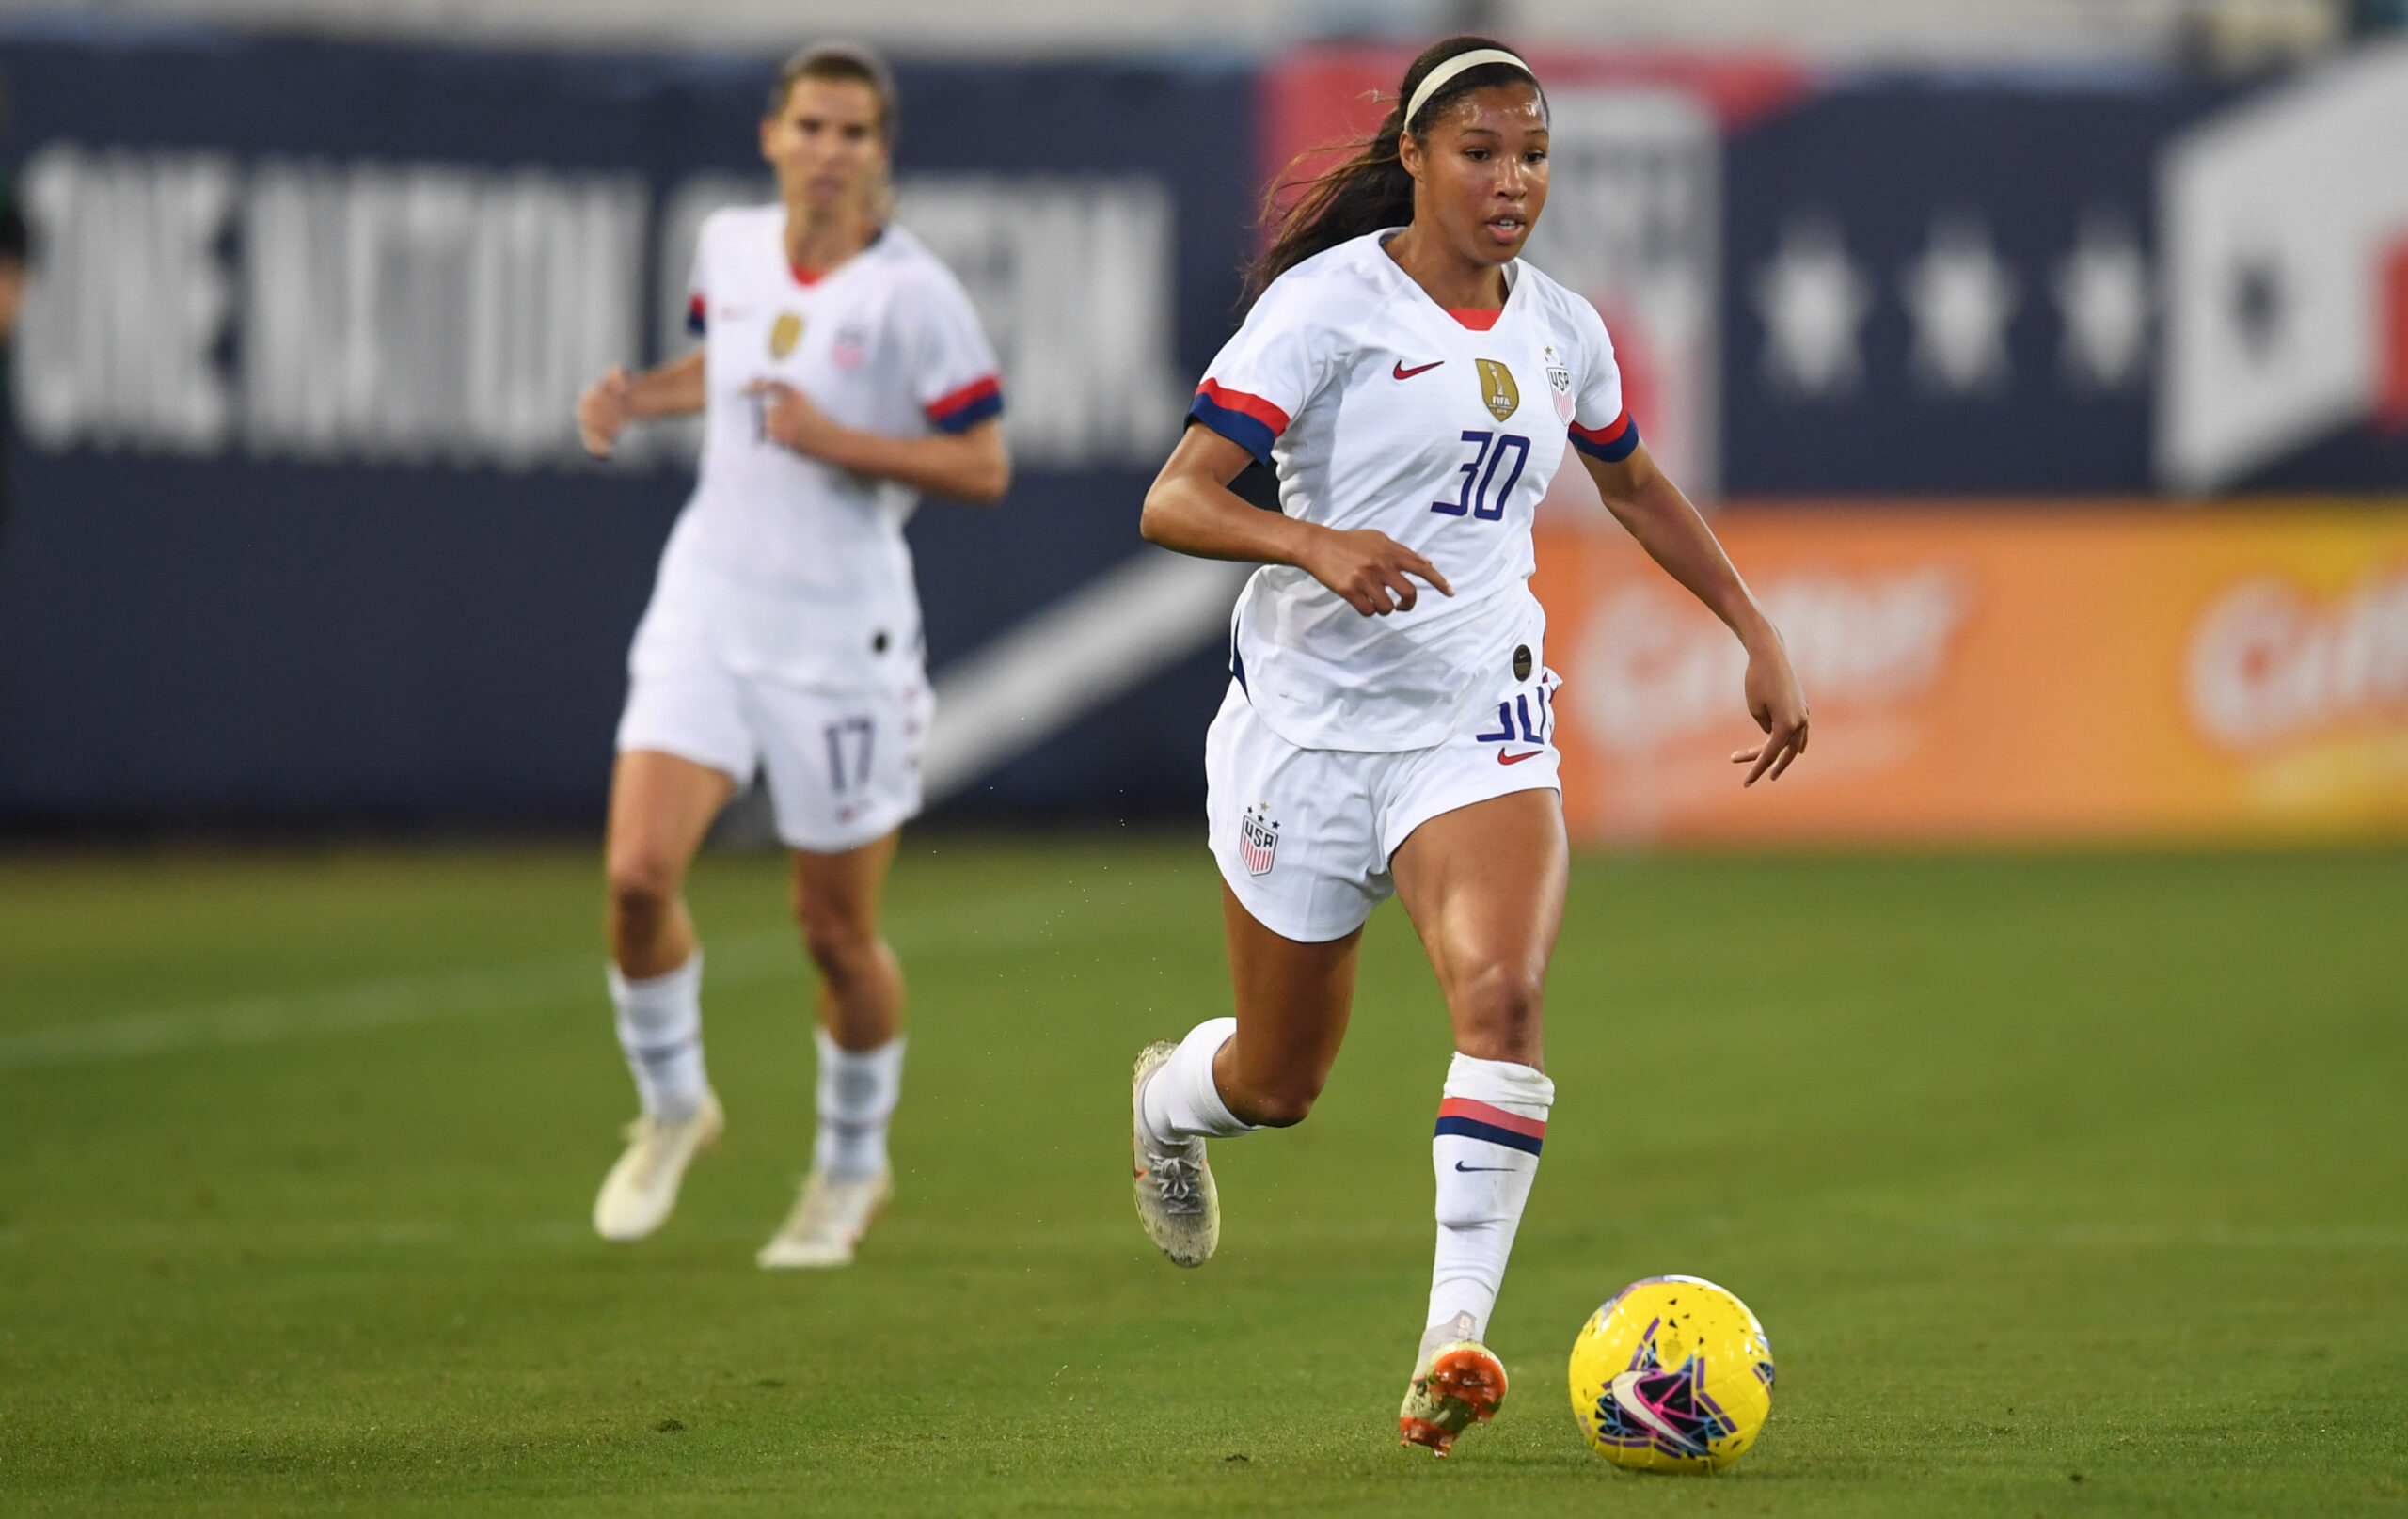 JACKSONVILLE, FL - NOVEMBER 10: Margaret Purce #30 of the United States looks for an open man downfield during a game between Costa Rica and USWNT at TIAA Bank Field on November 10, 2019 in Jacksonville, Florida.